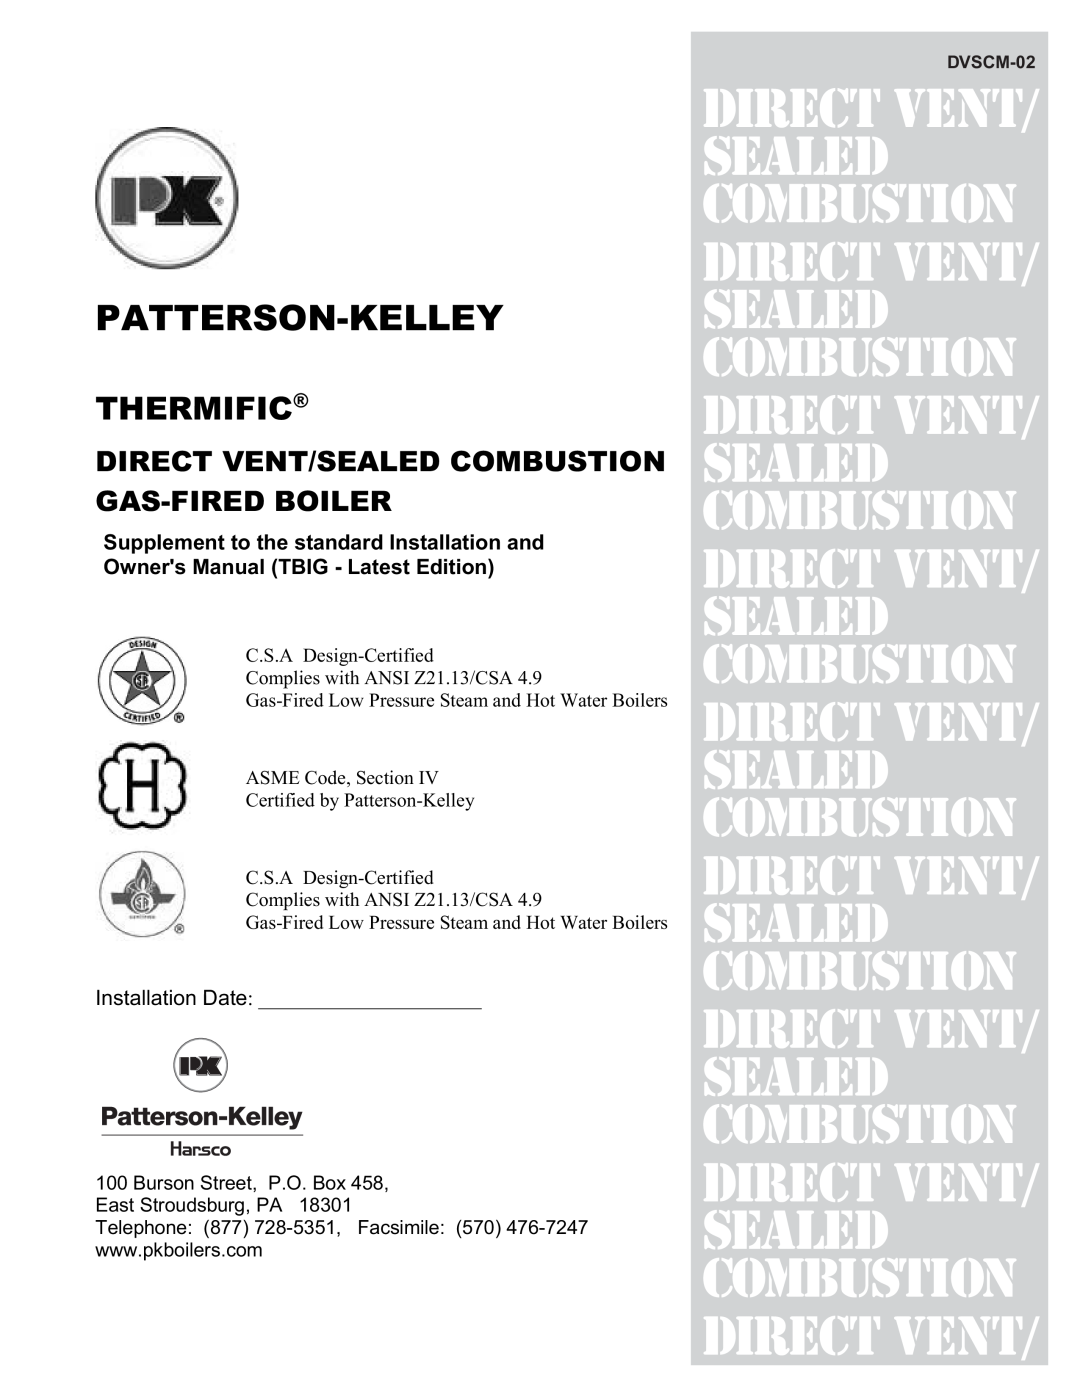 Patterson-Kelley DVSCM-02 owner manual Direct Vent/ Sealed Combustion, Patterson-Kelley, Thermific 